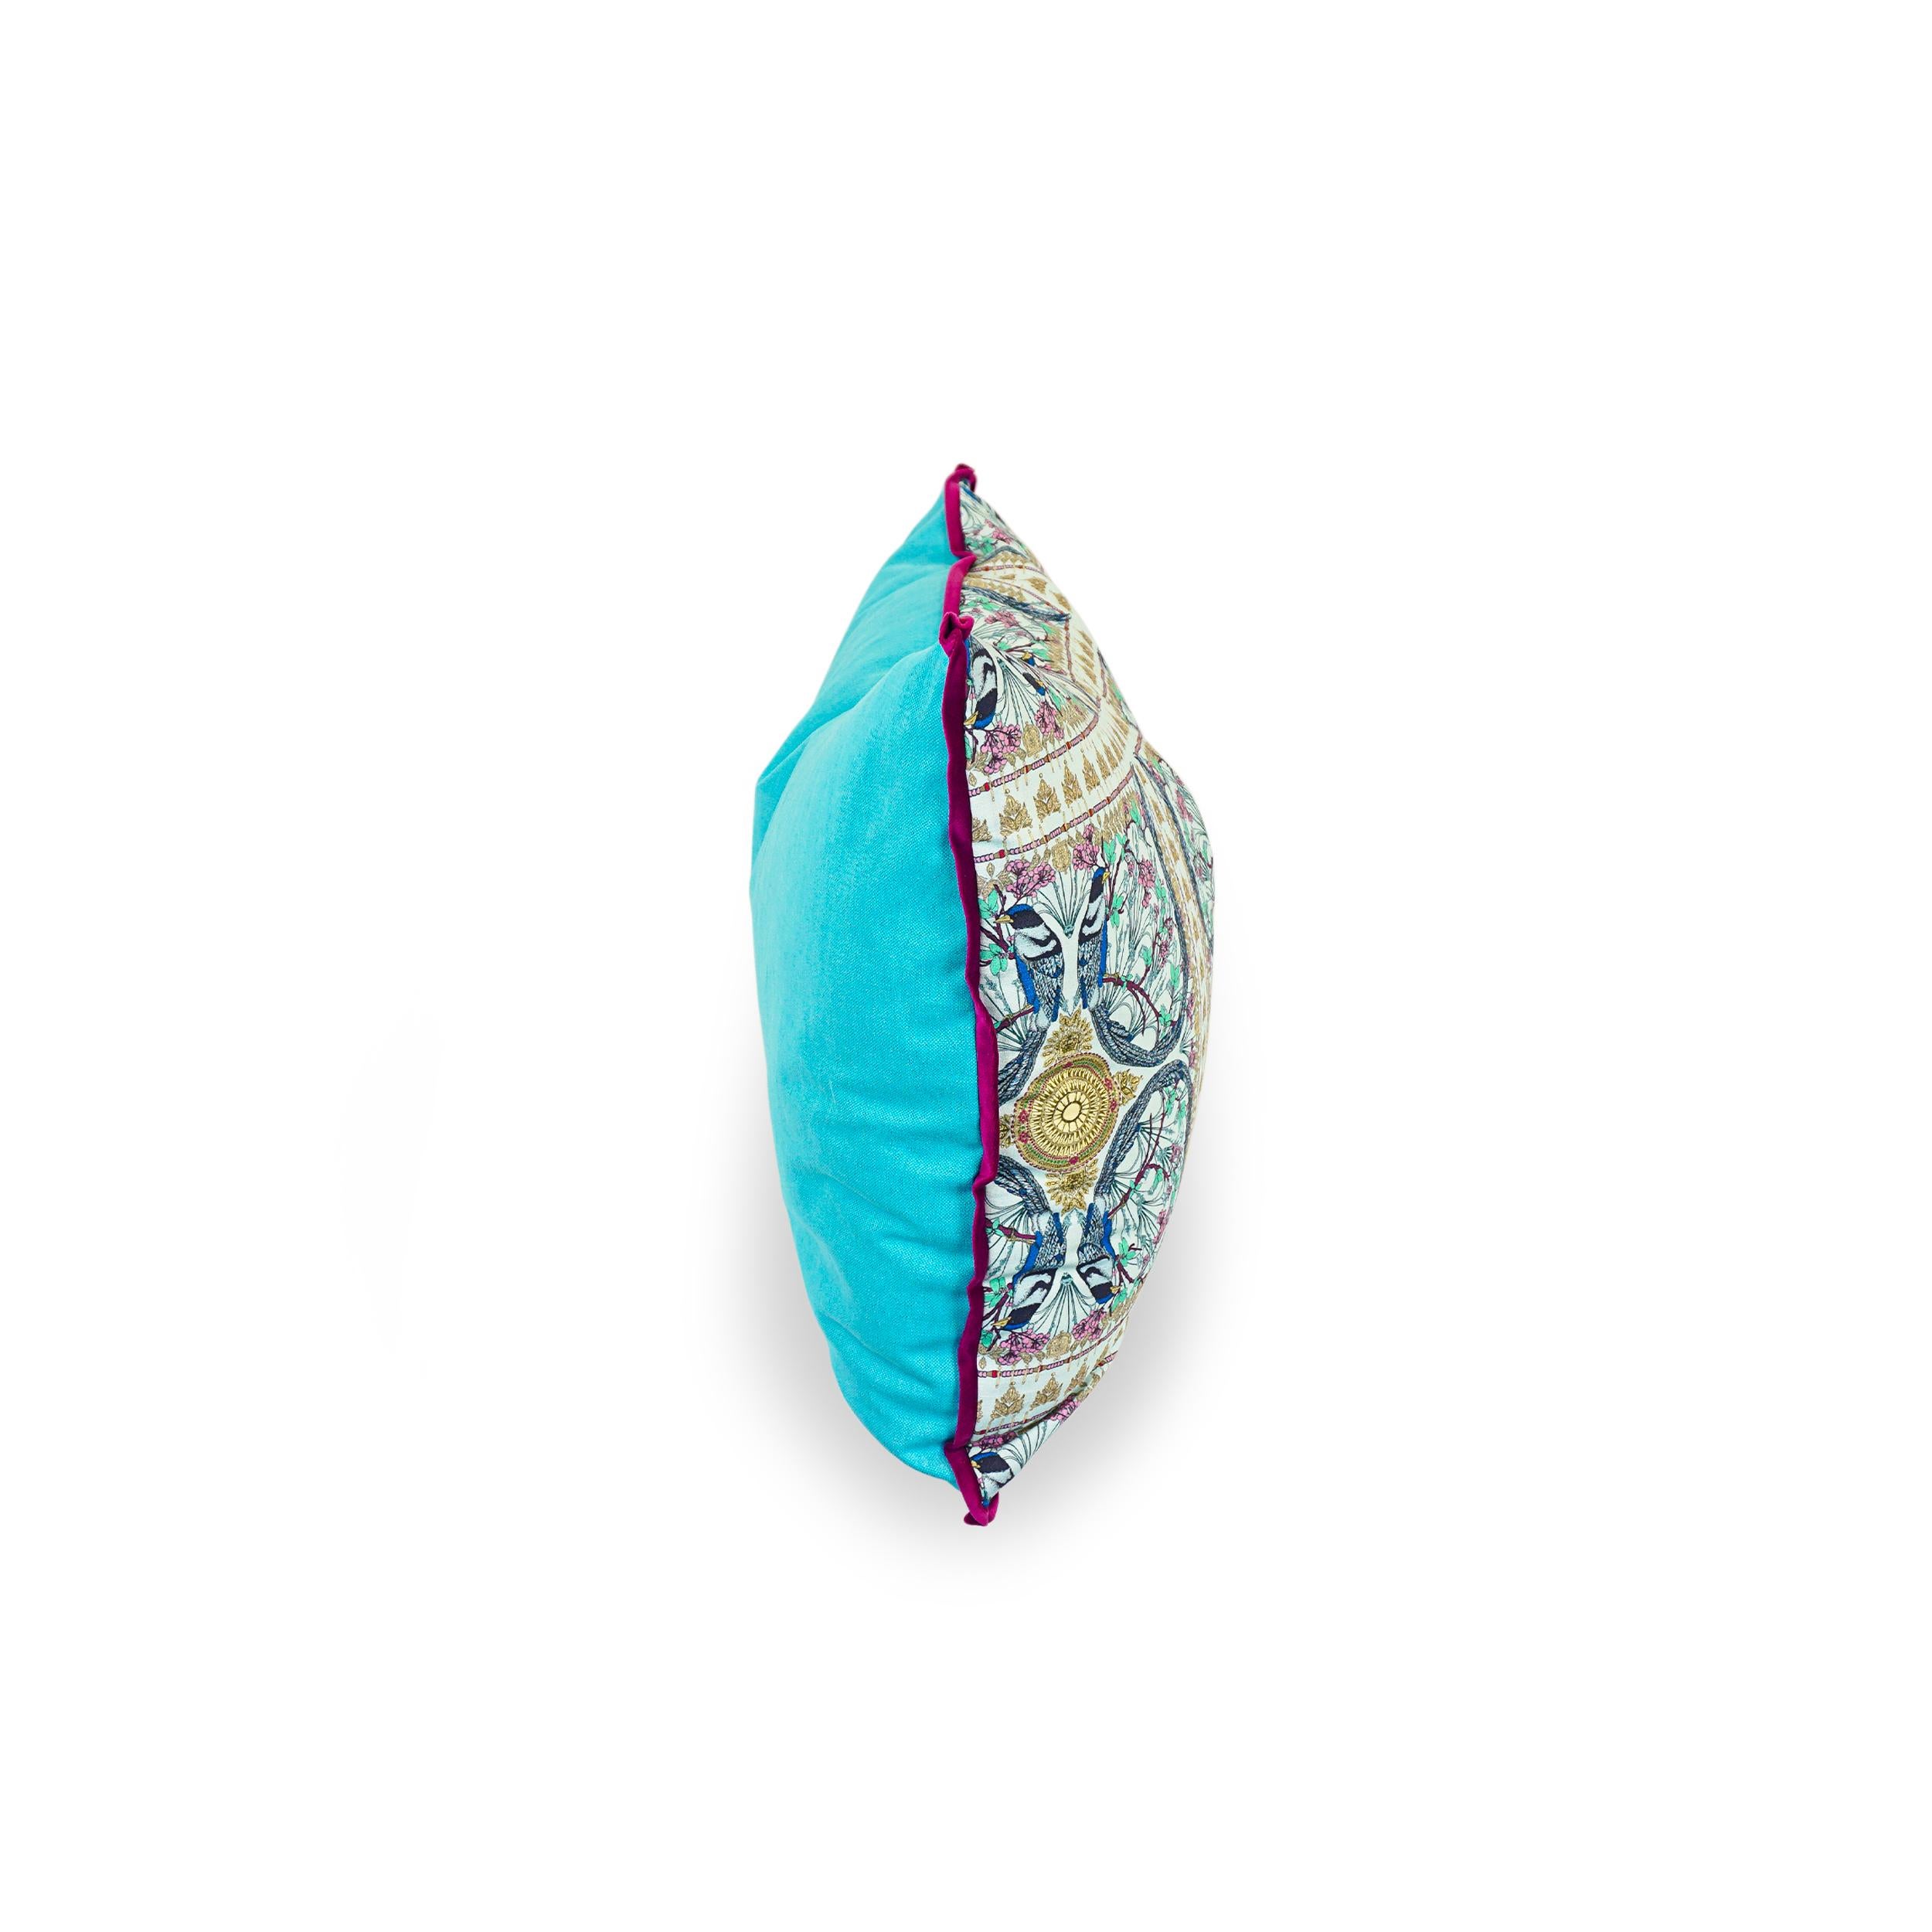 Modern Oversized Throw Pillow with Elaborate Printed Linen, Aqua Back and Berry Flange For Sale